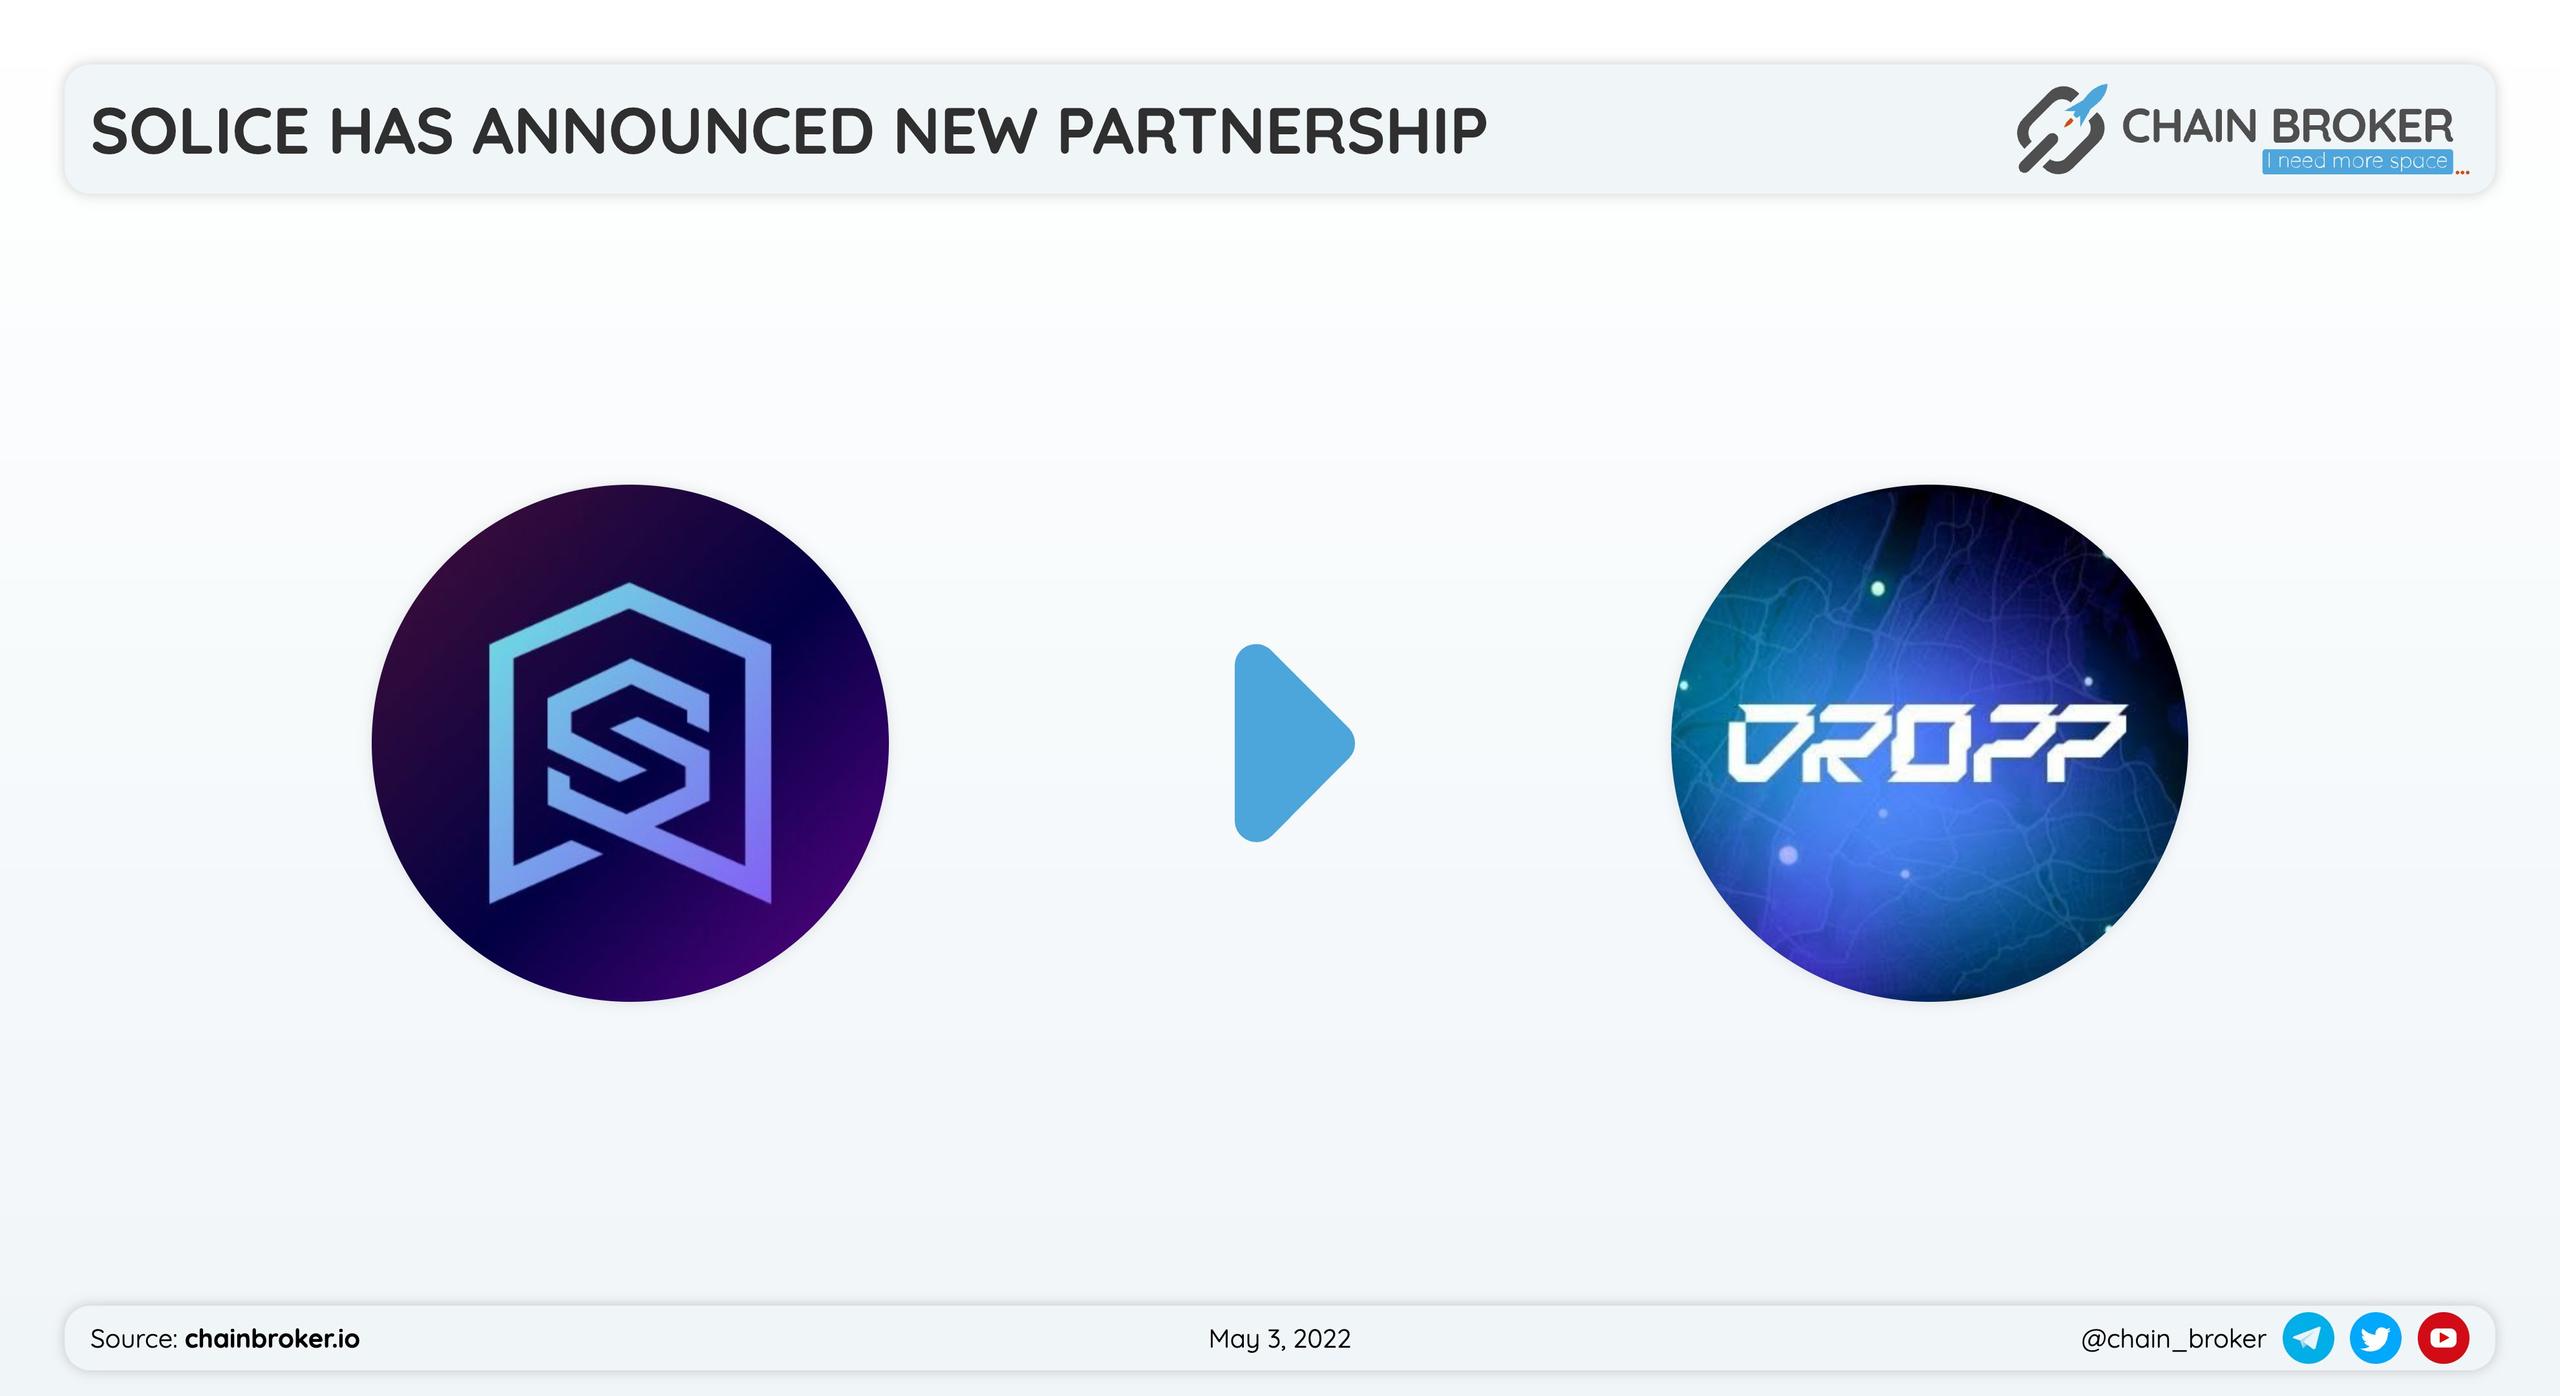 Solice has partnered with Dropp